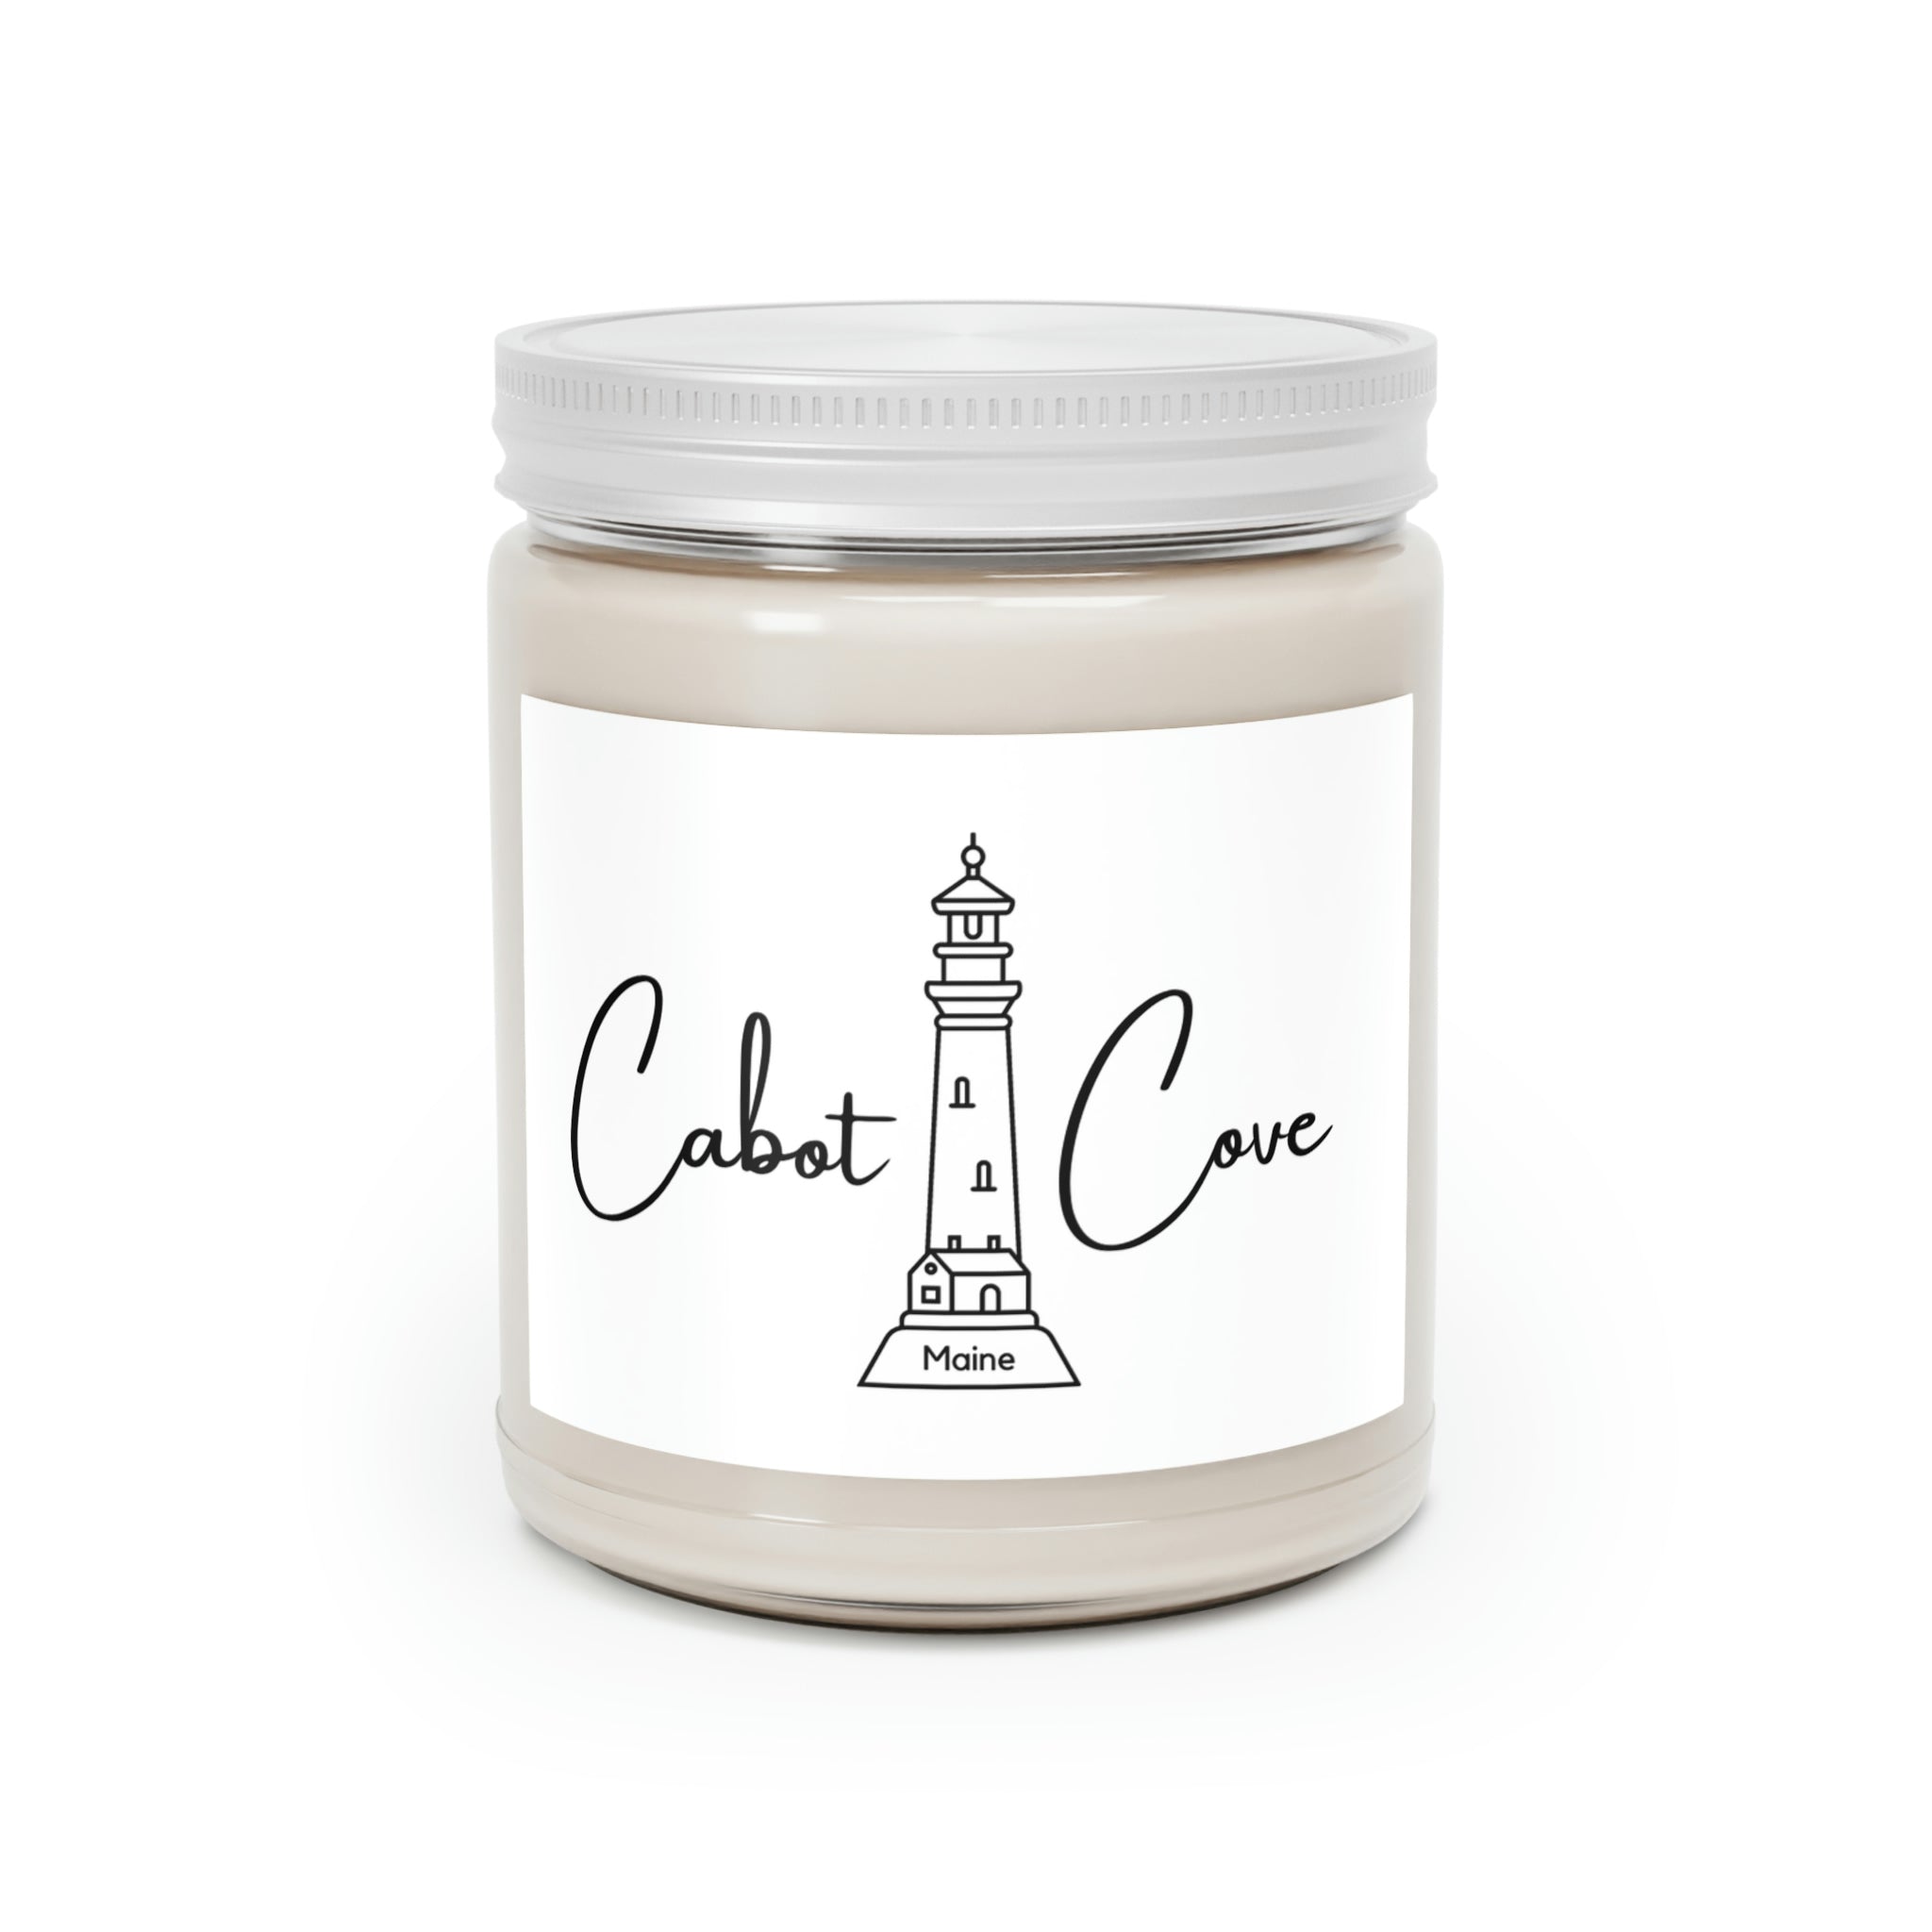 Cabot Cove Soy Candle Eco Friendly, Aromatherapy Scented 9 oz